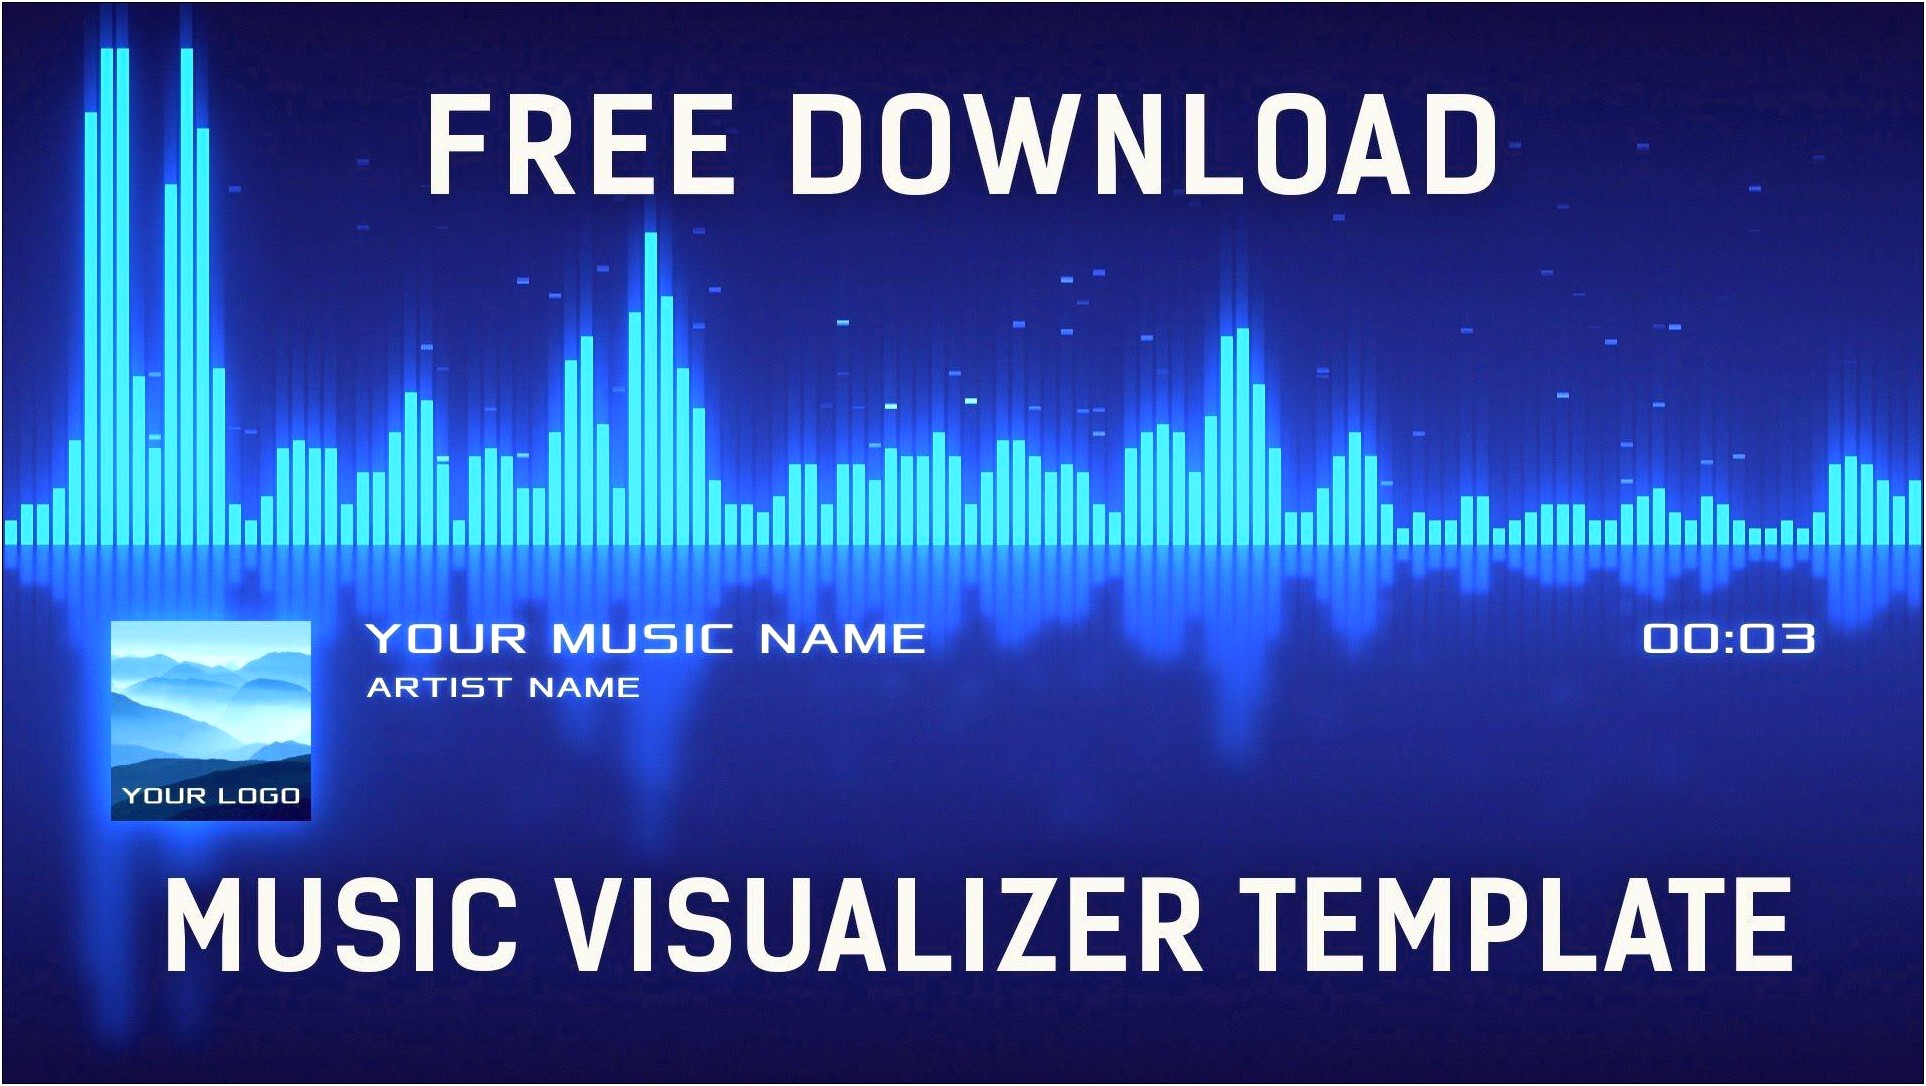 Adobe After Effects Audio Spectrum Templates Free